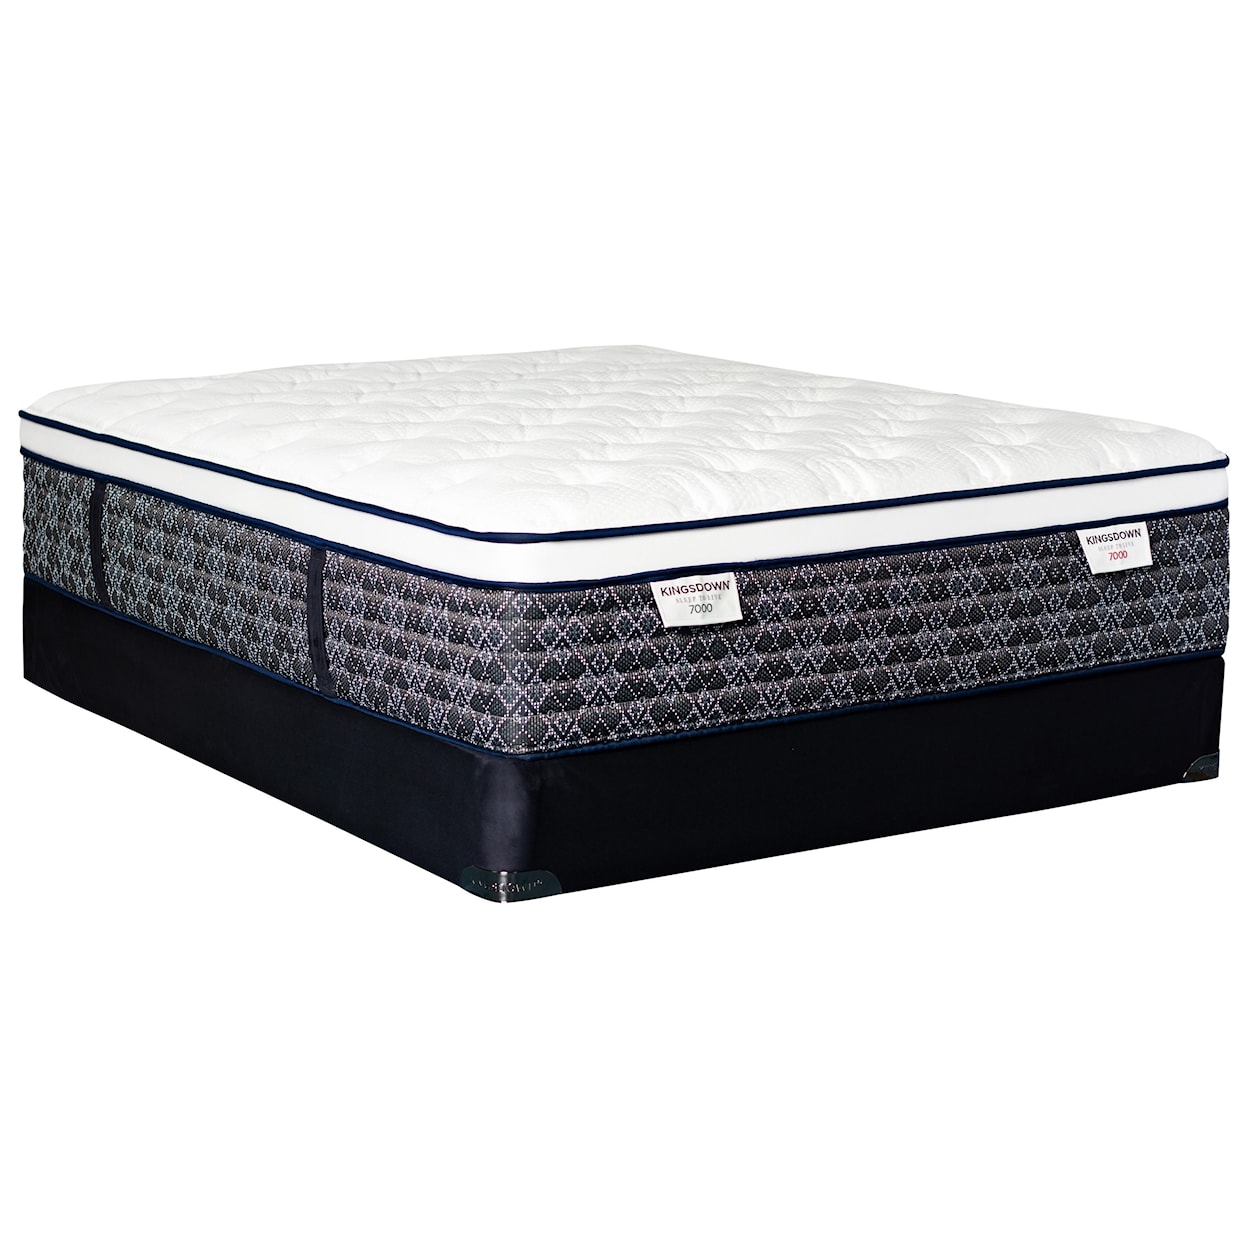 Kingsdown Sleep to Live 7000 Gold Blue ET Twin Pocketed Coil Mattress Set